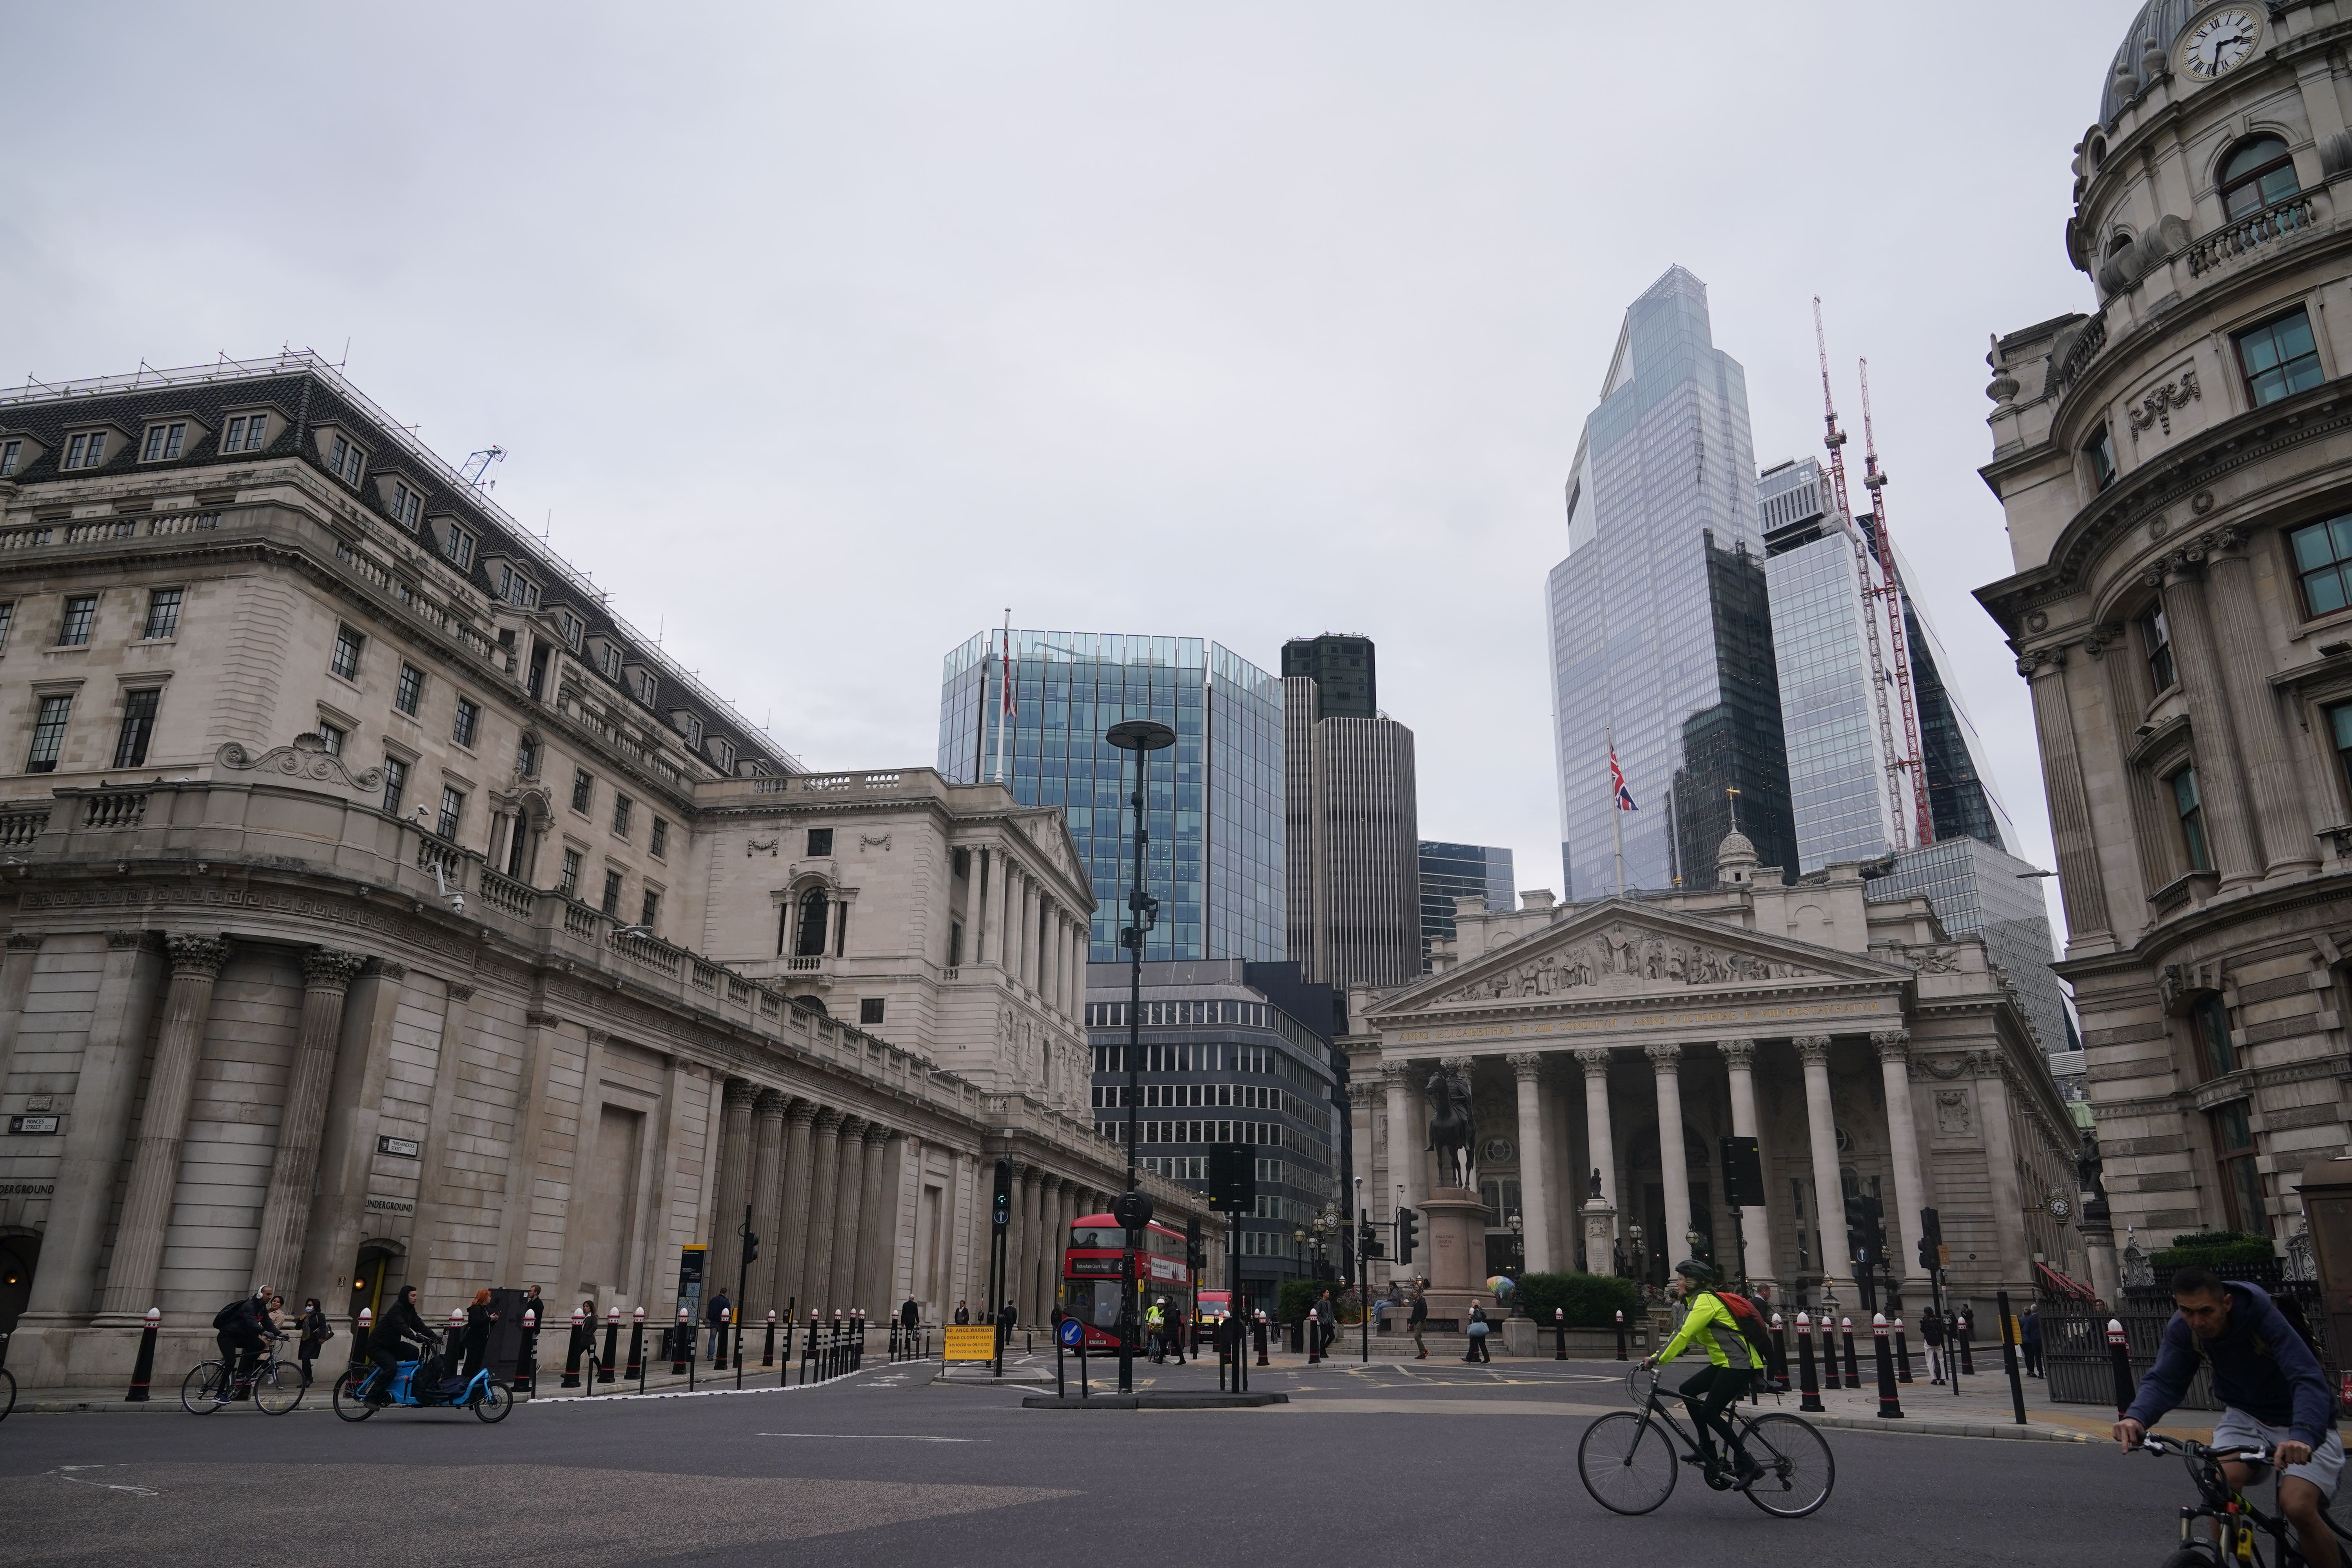 Interest rates have been raised from 4 per cent to 4.25 per cent by the Bank of England